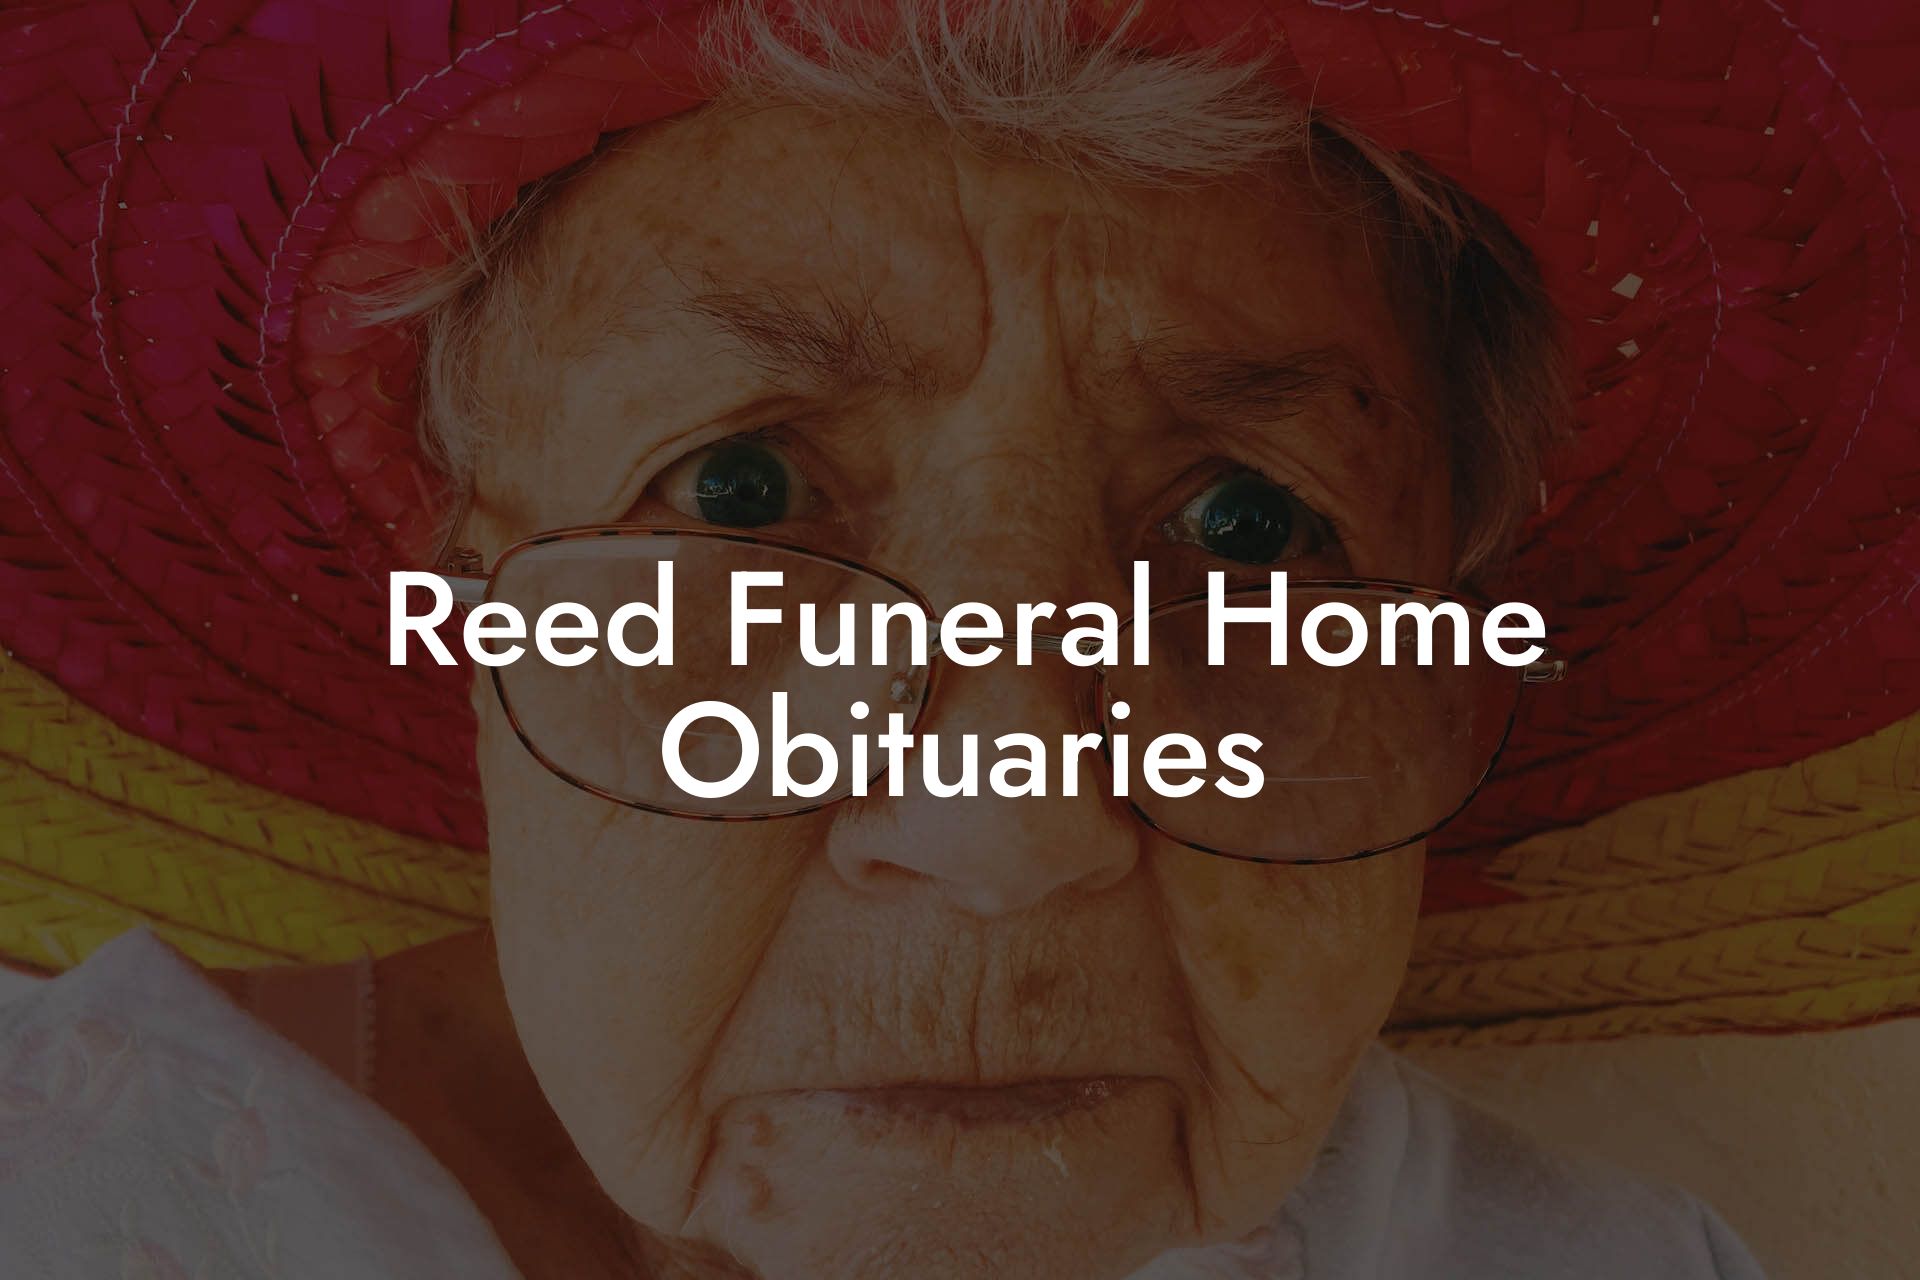 Reed Funeral Home Obituaries